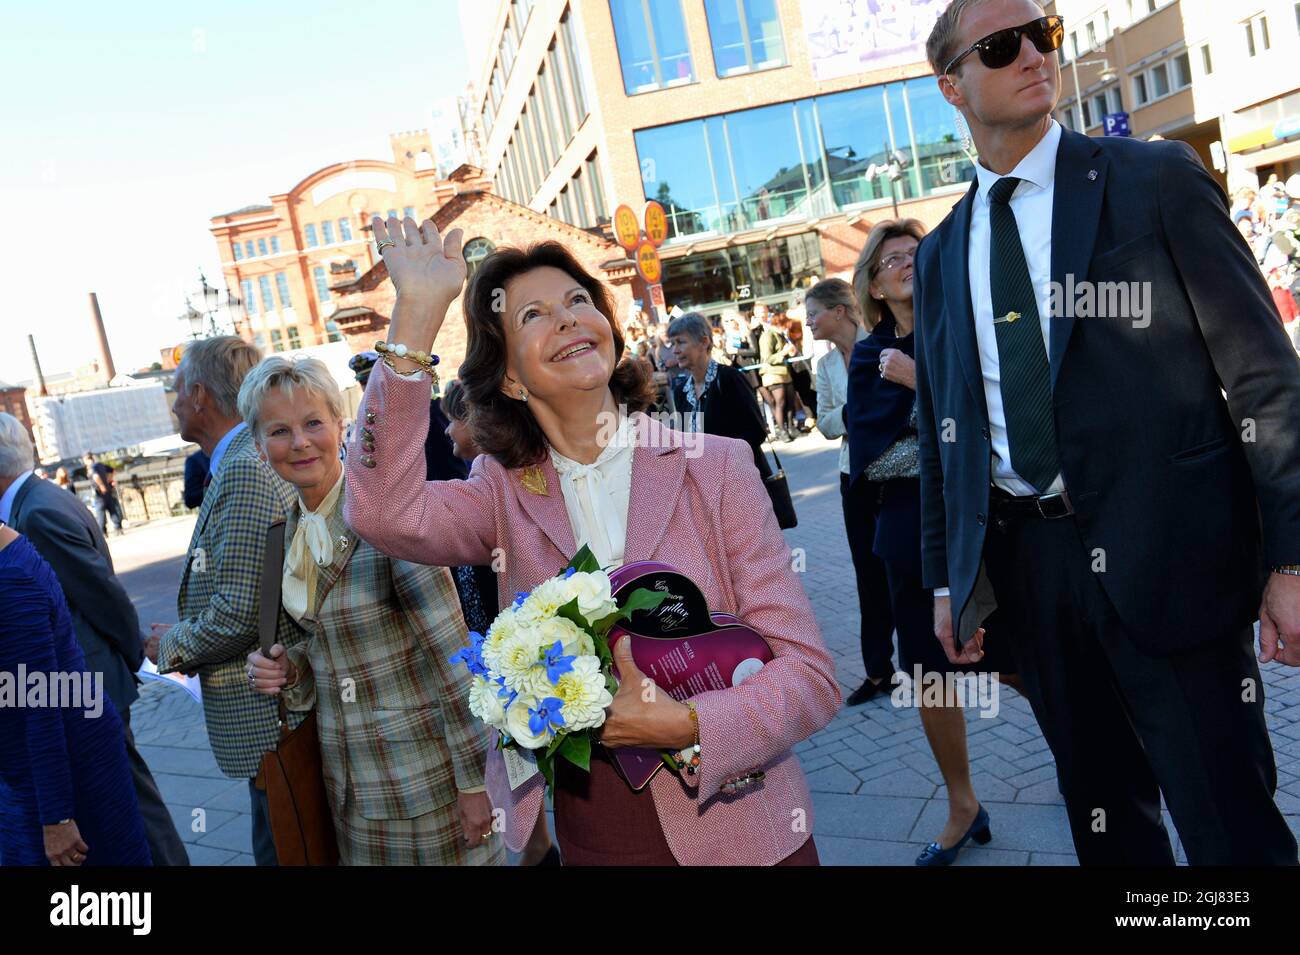 NORRKOPING 20130903 King Carl Gustaf and Queen Silvia are seen welcomed to the Campus Norrkping/Printed Electronics Arena in the city of Norrkoping, Sweden, September 3, 2013. The visit is a part of the Kings ongoing 40 year anniversary on the throne. Foto:Jonas Ekstromer / SCANPIX / Kod 10030  Stock Photo